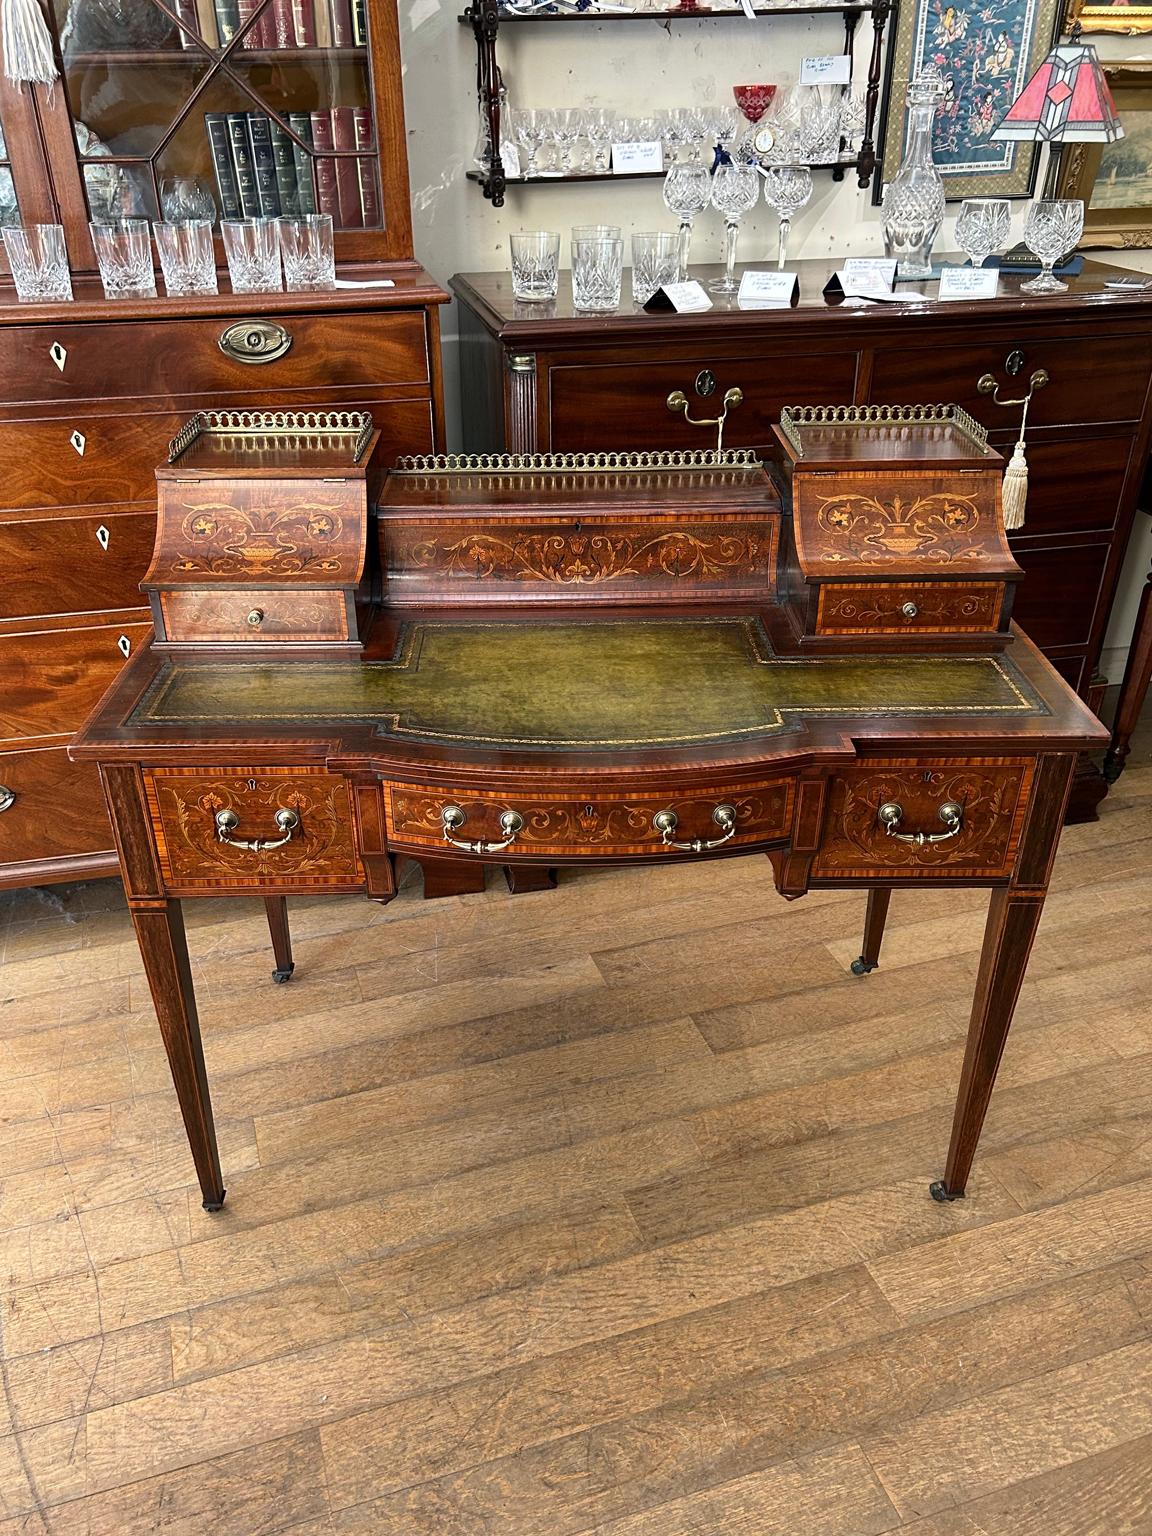 A very high quality 19th Century Carlton House Desk – Made by: Maple & Co. London Cabinet Makers for high quality furniture. The top has a brass gallery with two drawers and three lift up compartments, which include pigeon holes and ink wells. Below